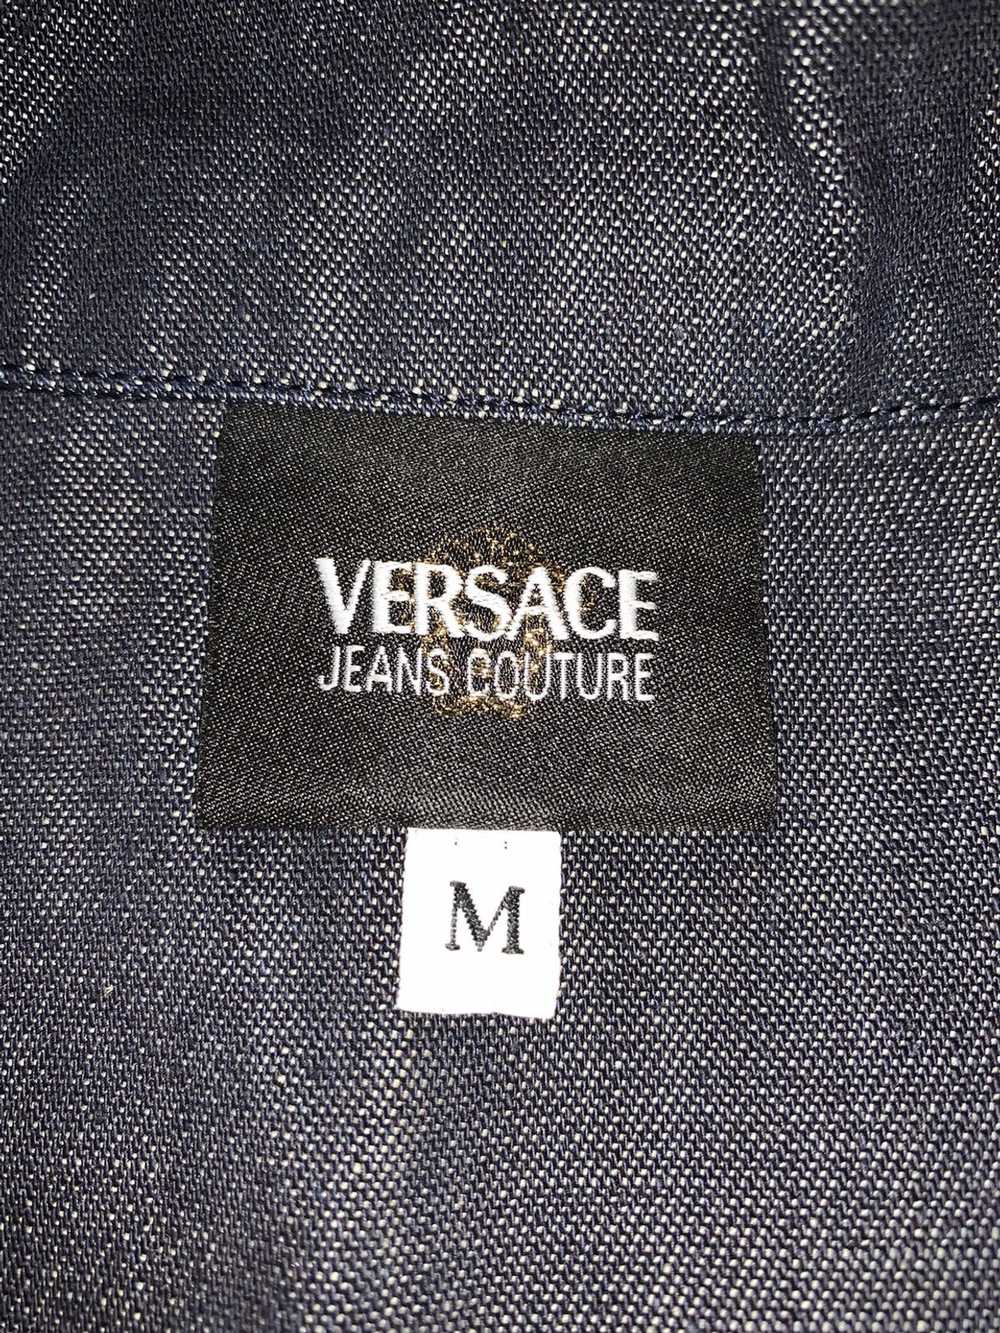 Versace Versace jeans couture - image 2